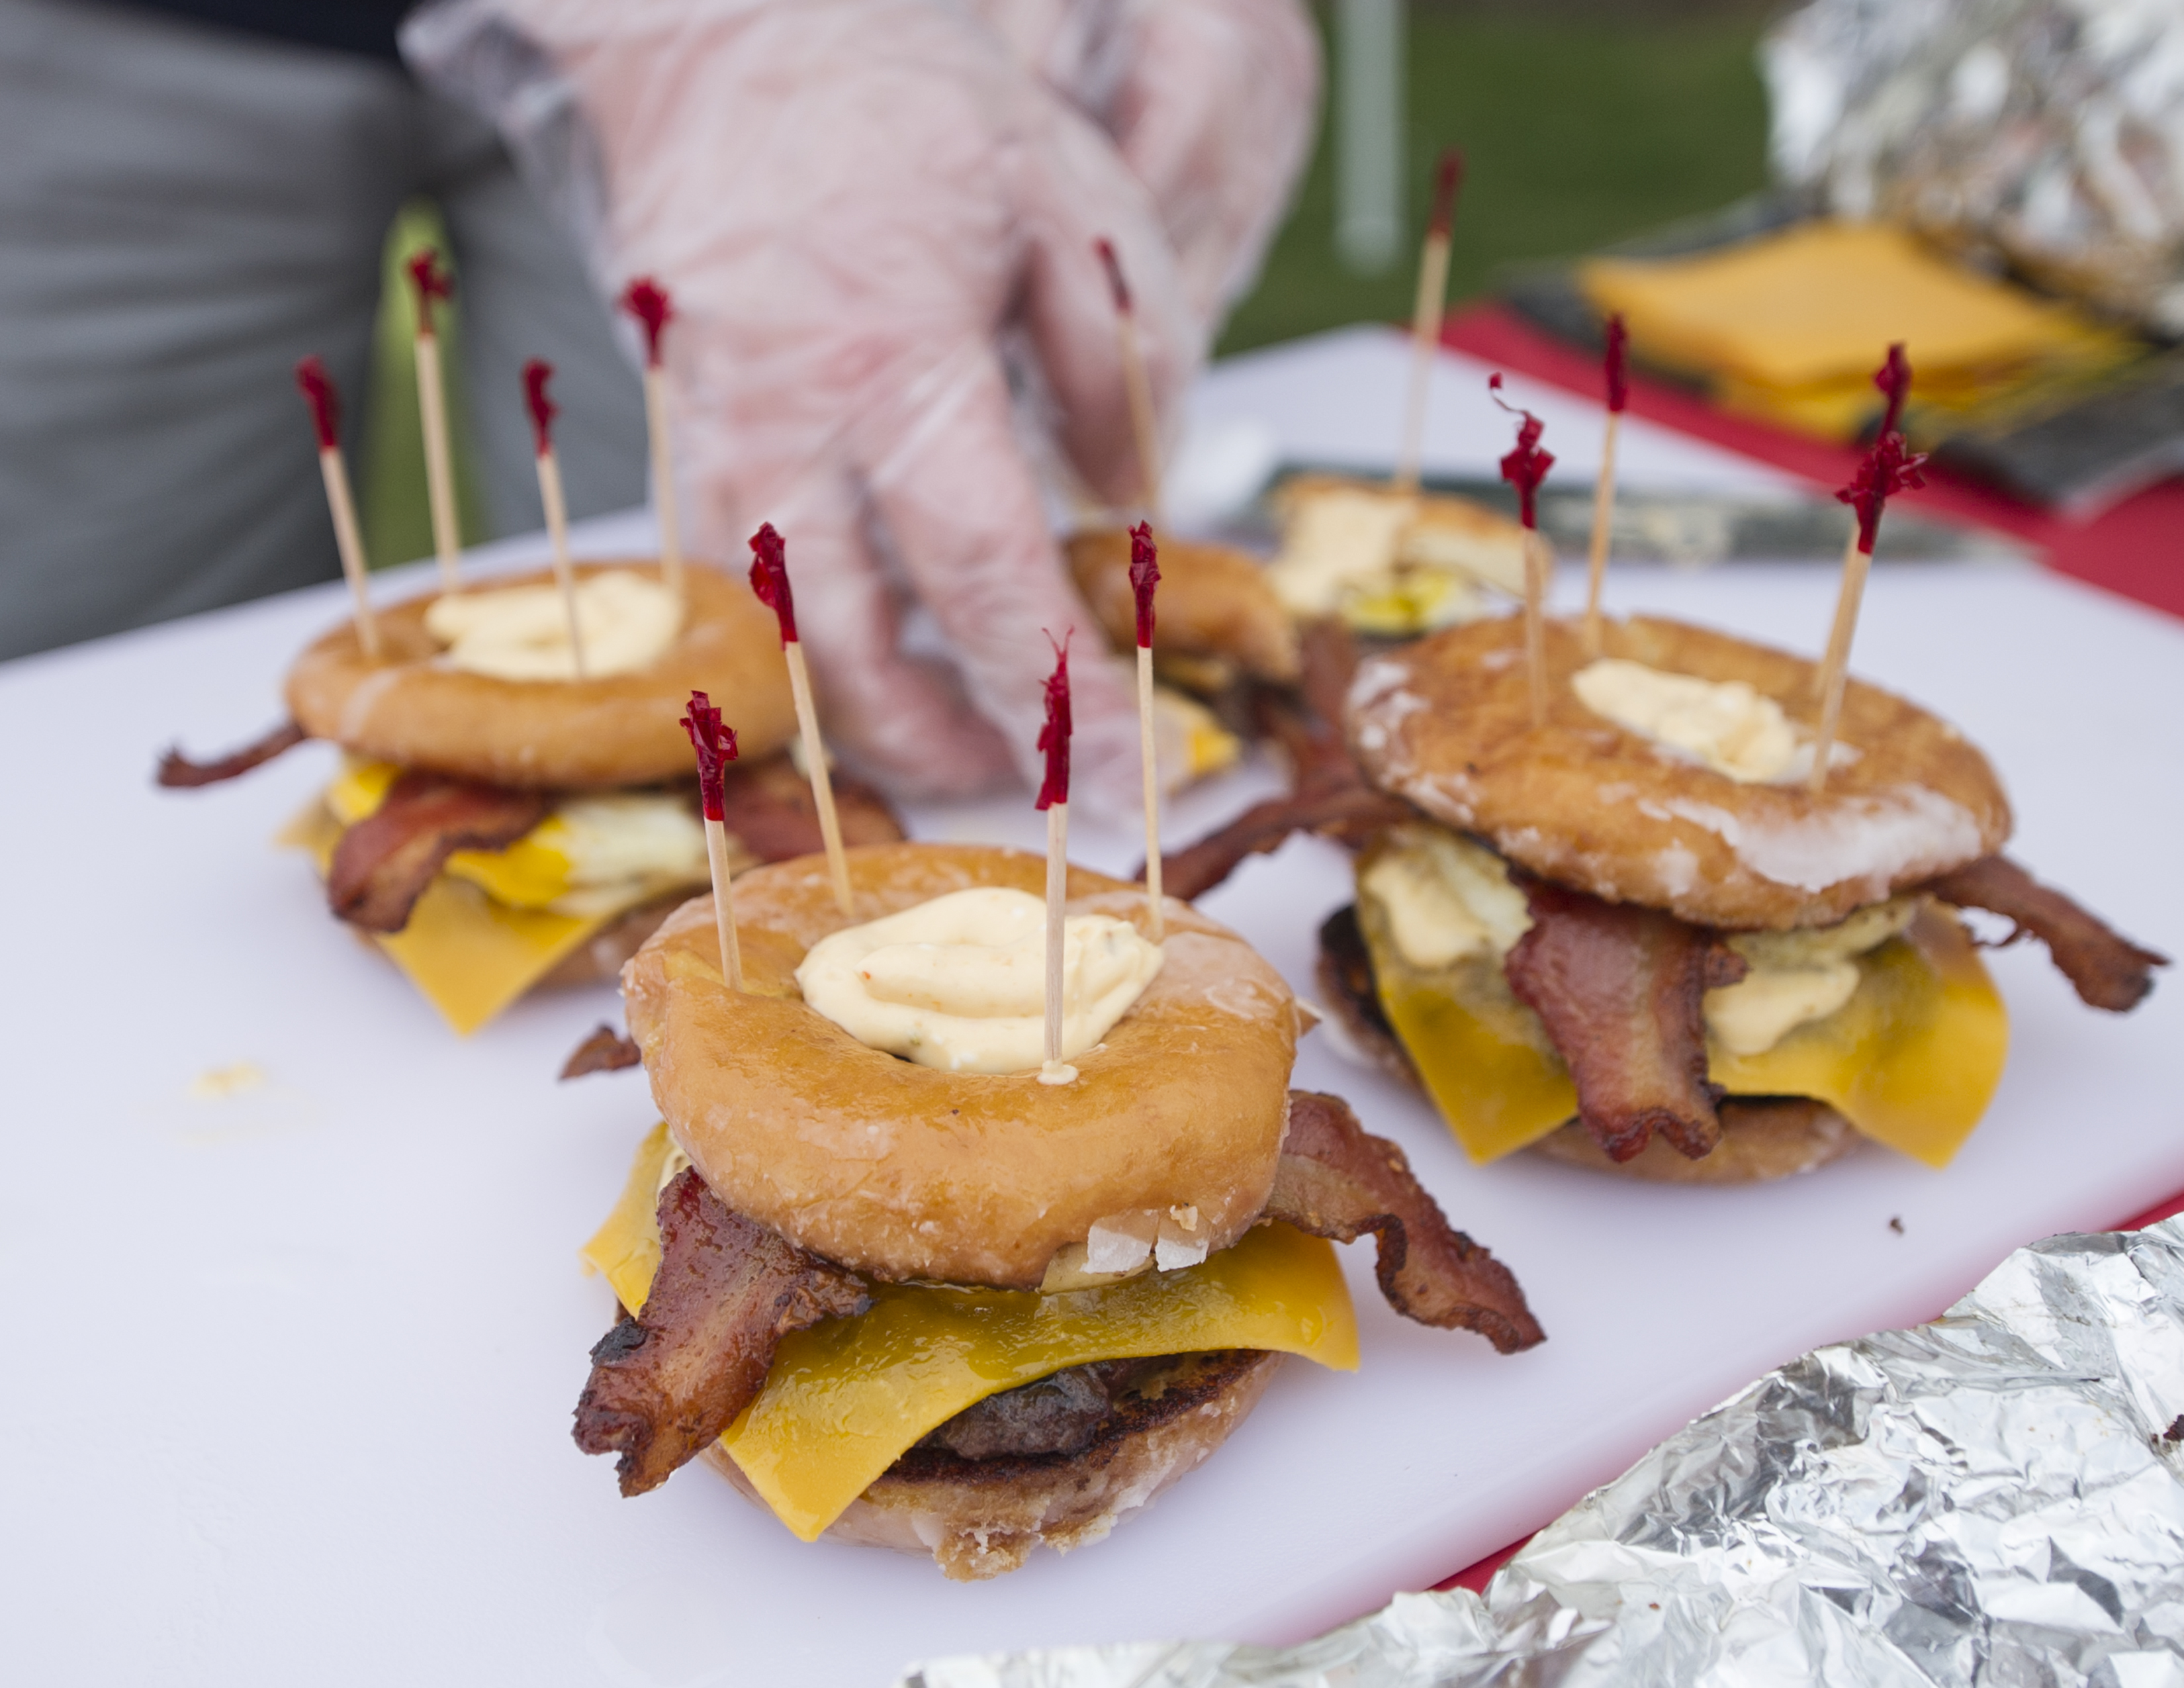 Fifth annual ‘Burger Wars’ scheduled for June 1